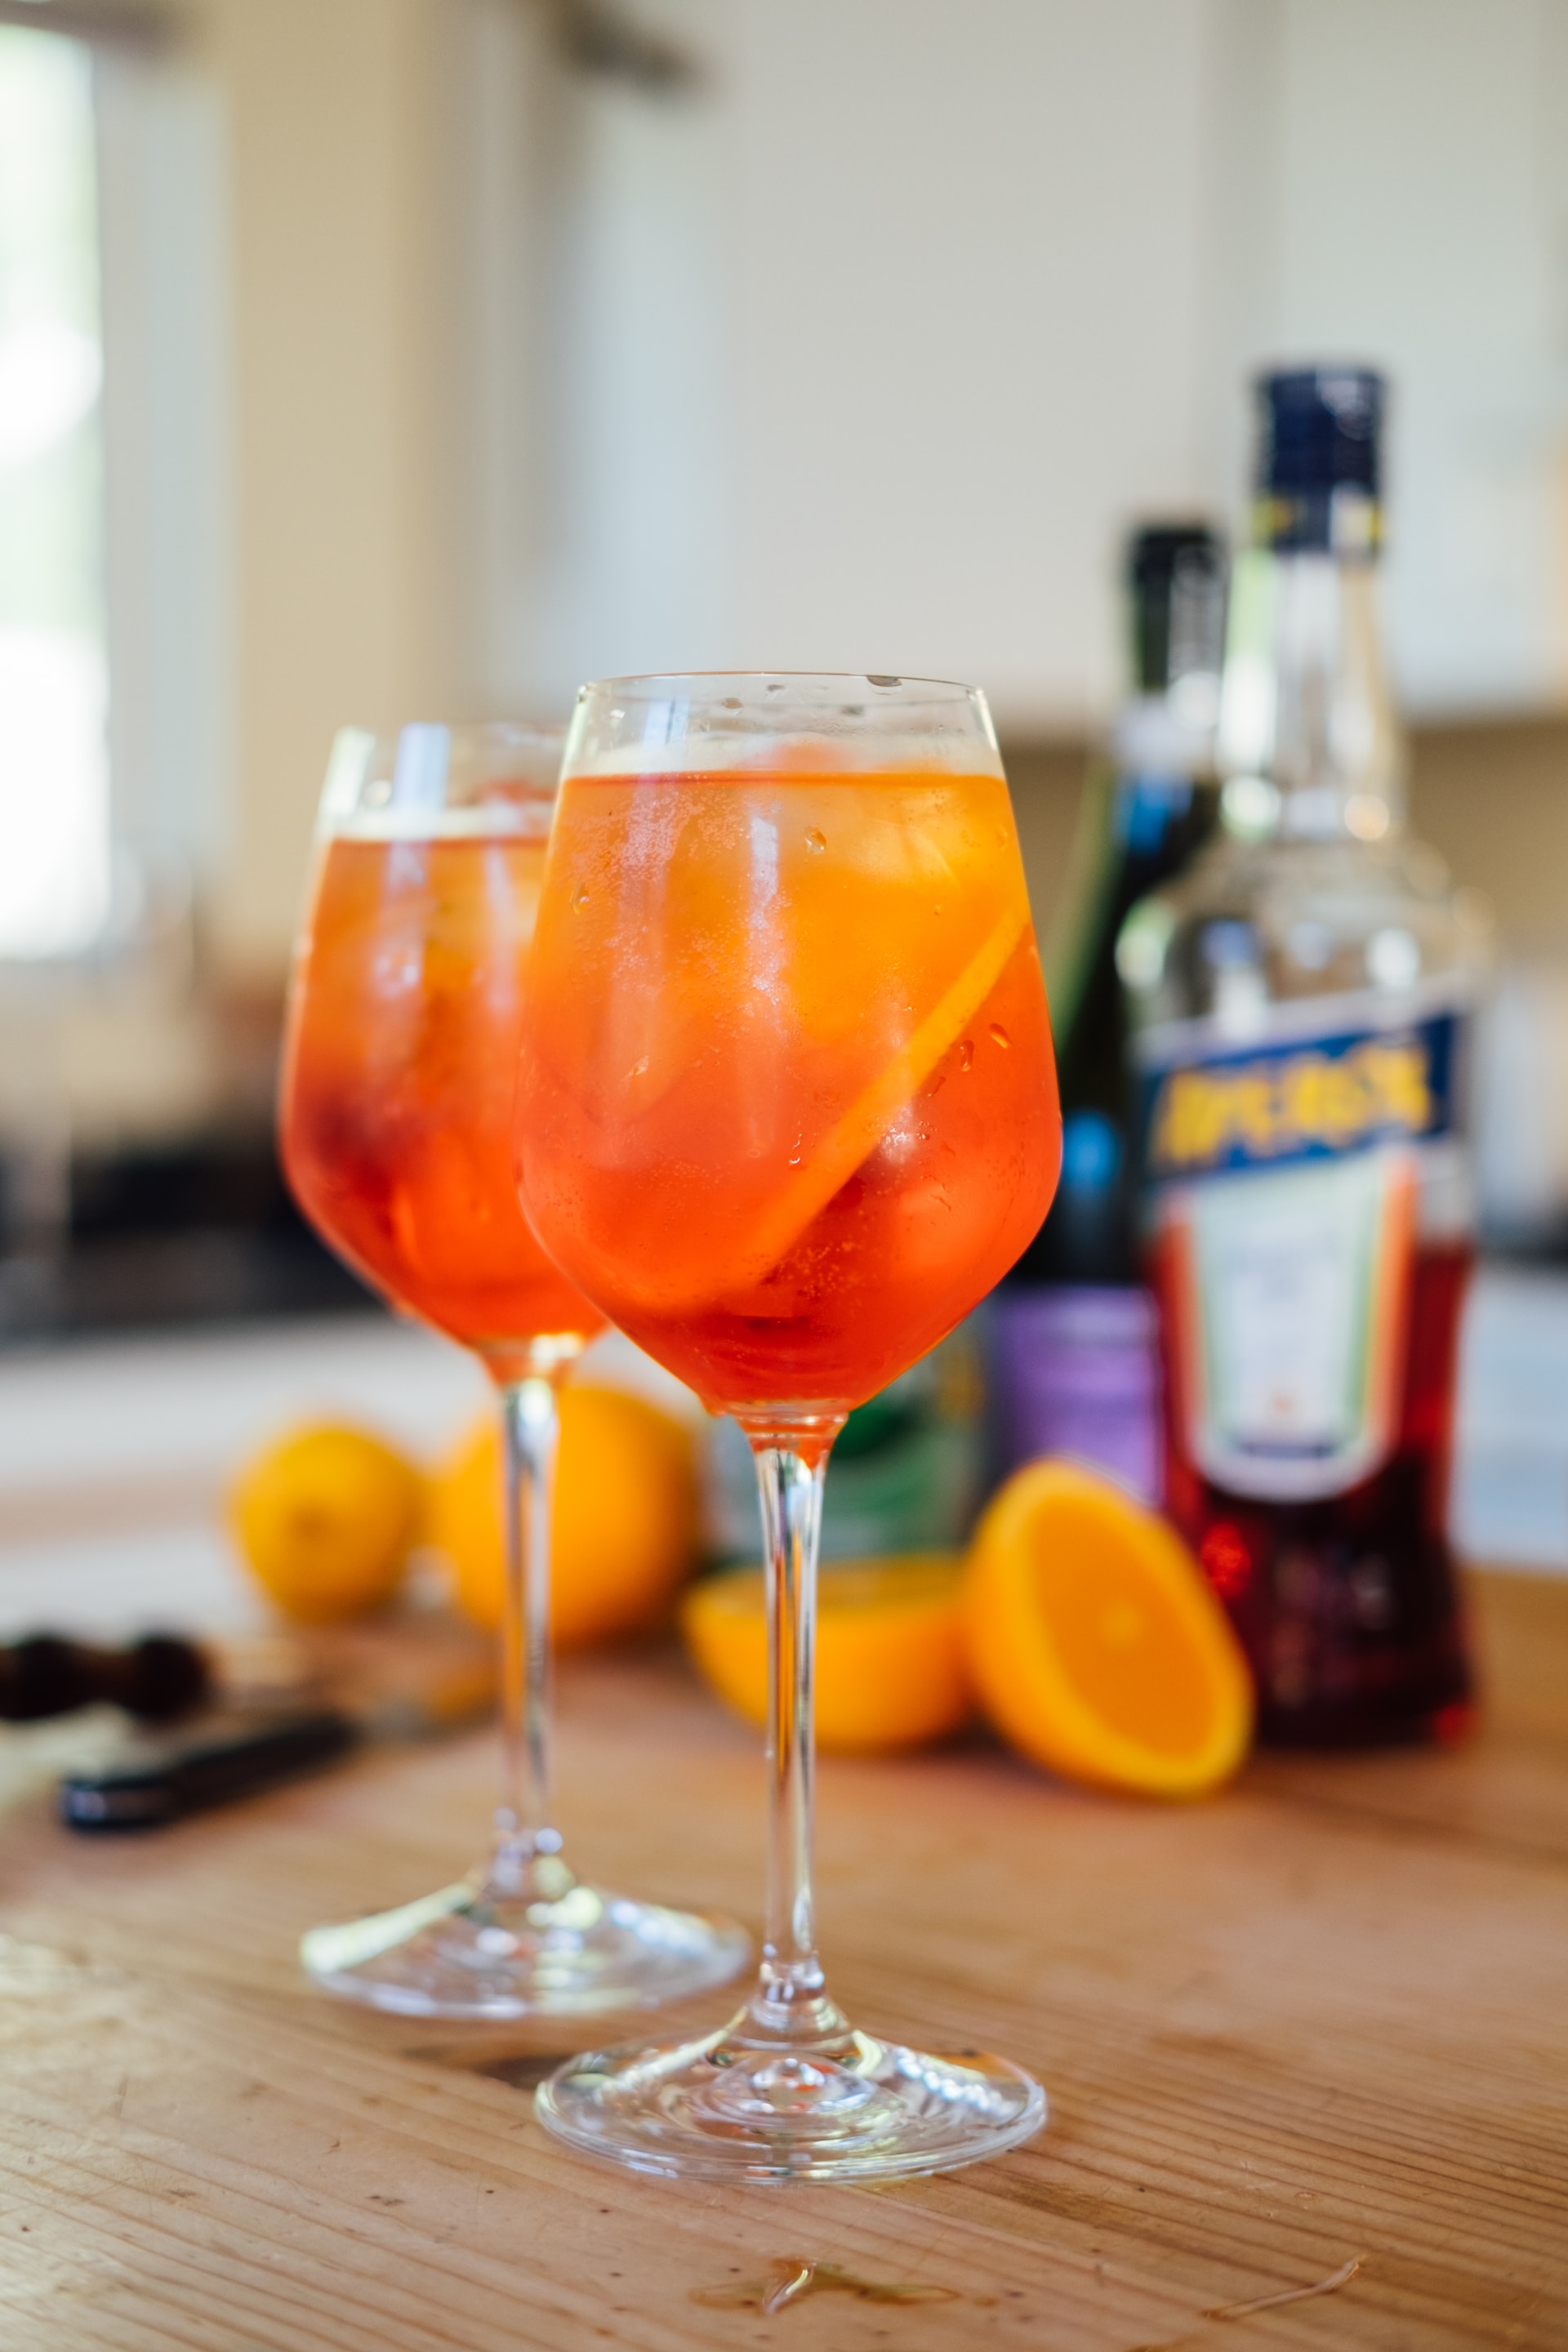 Our Aperol spritz recipe is as close to perfect as you'll find - The Manual